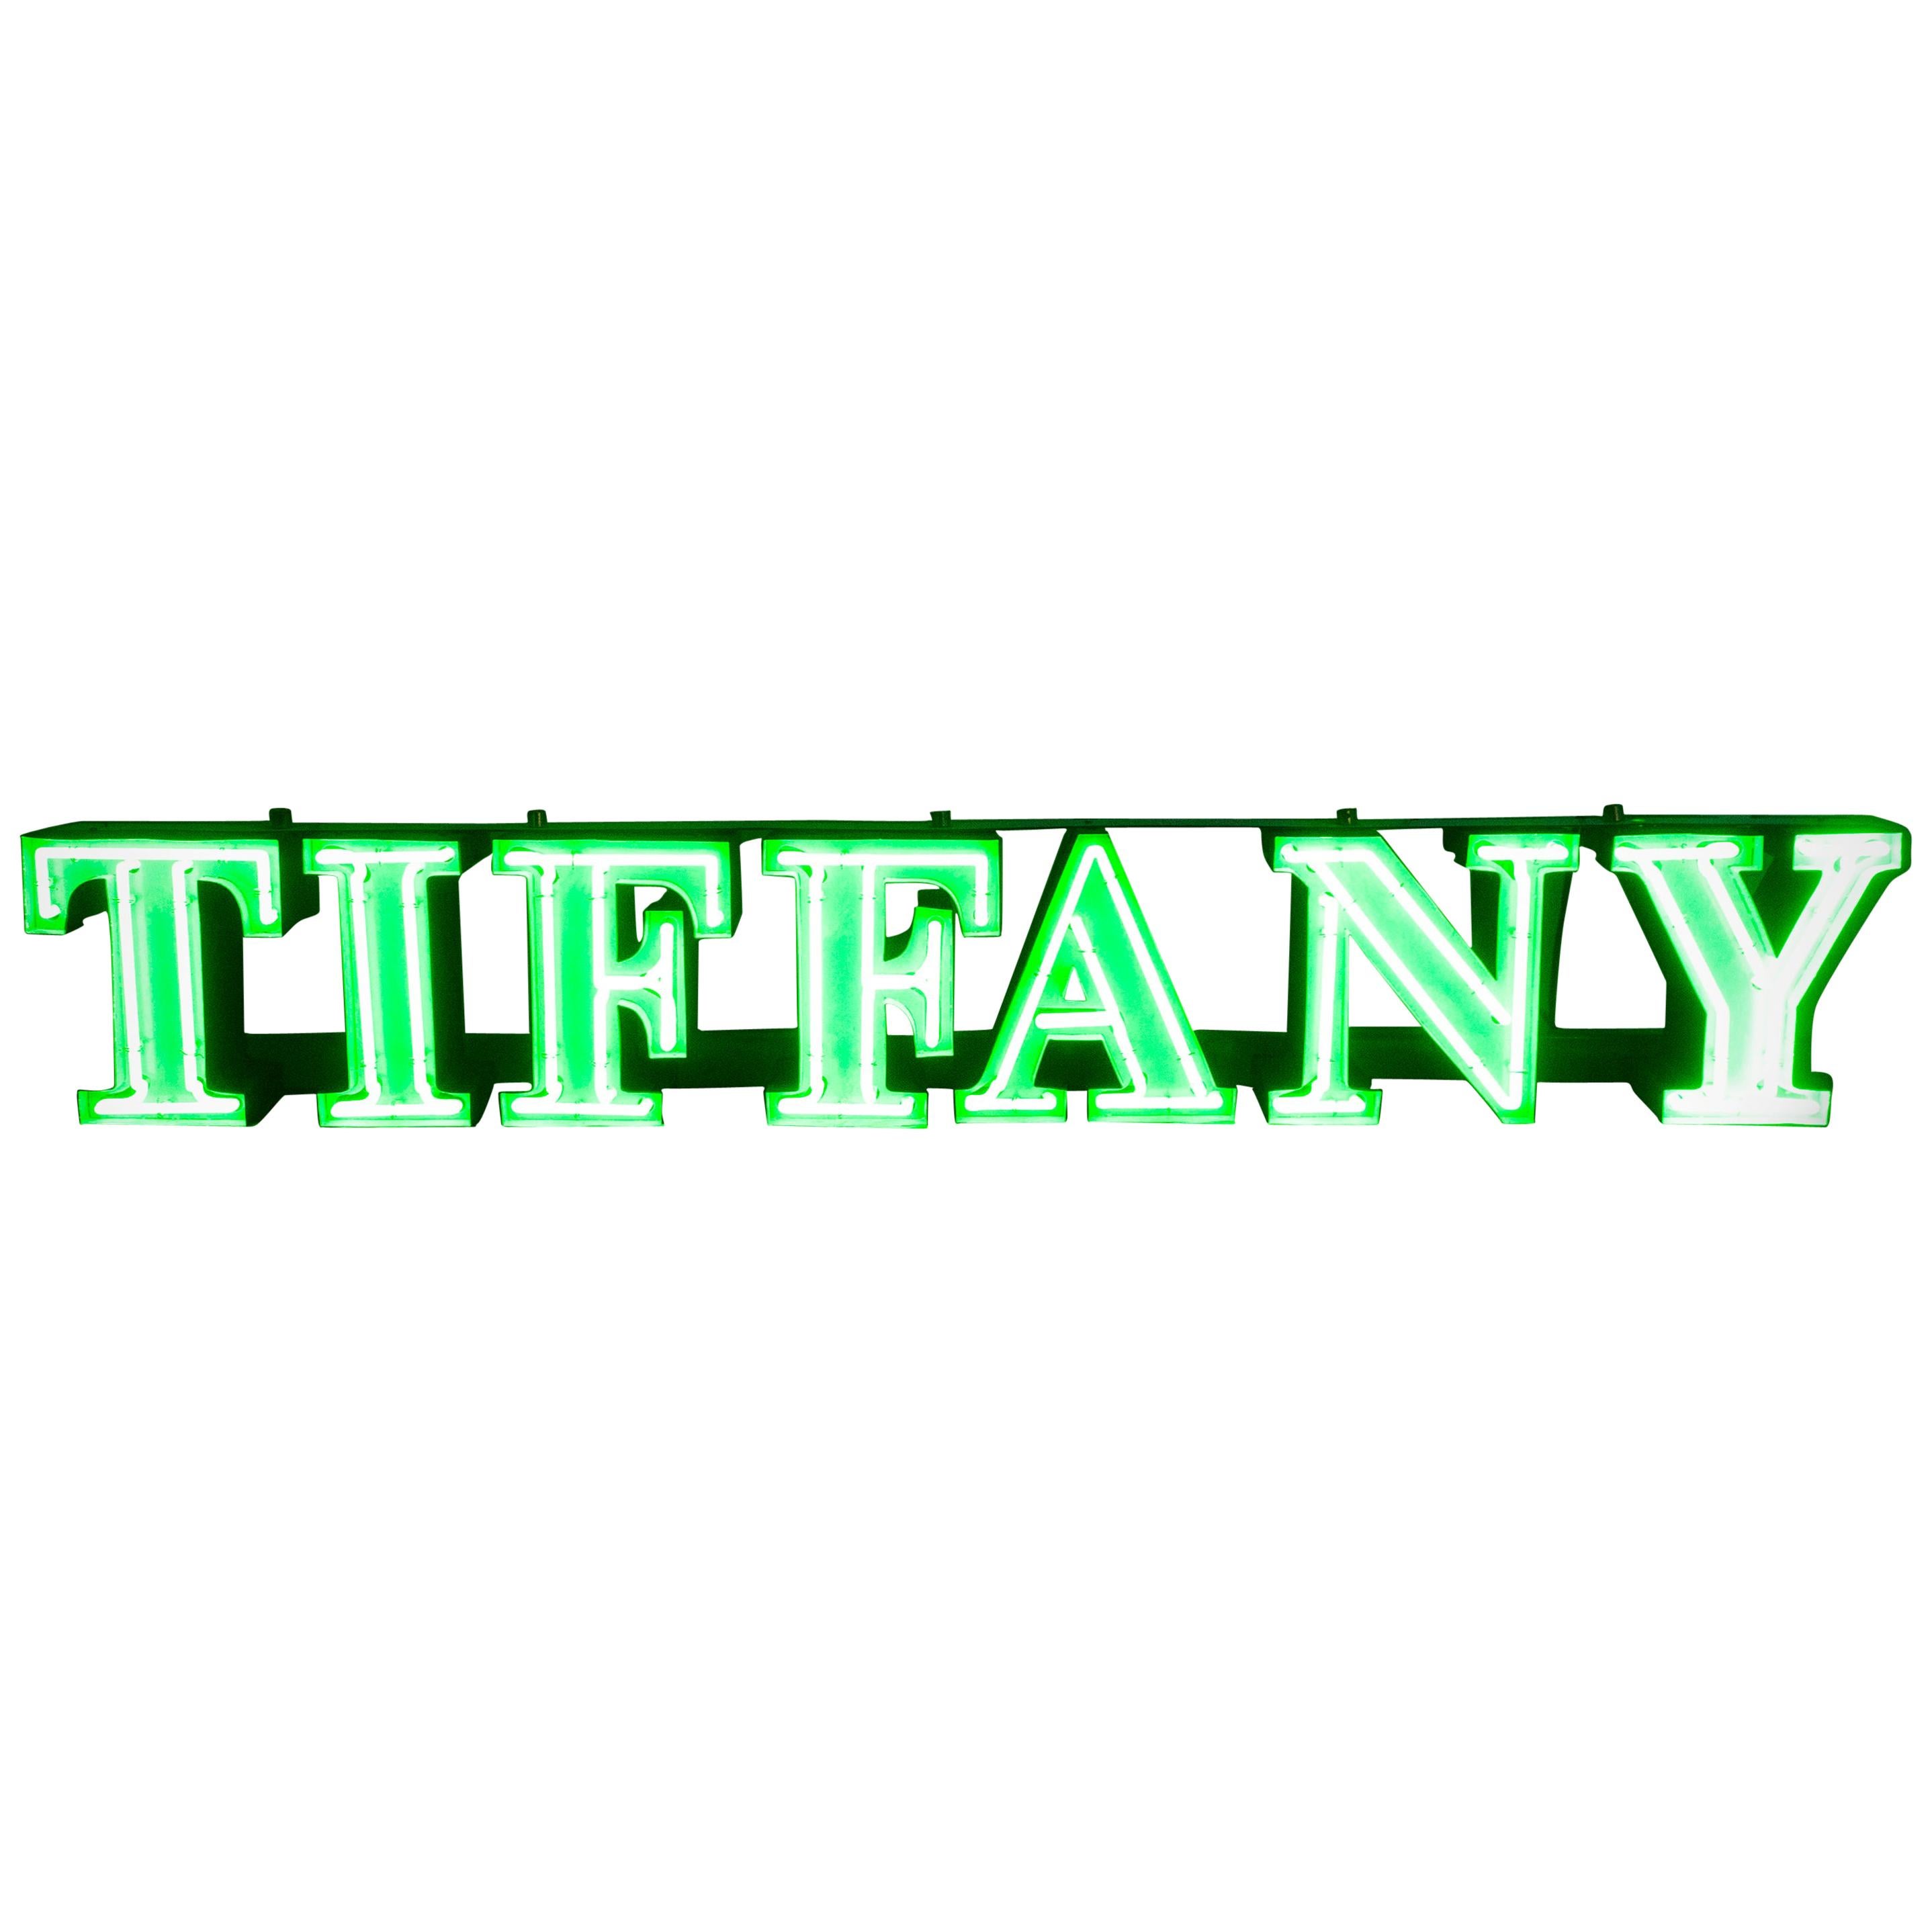 Tiffany Vintage Neon Lettering Advertising Sign, 1970s